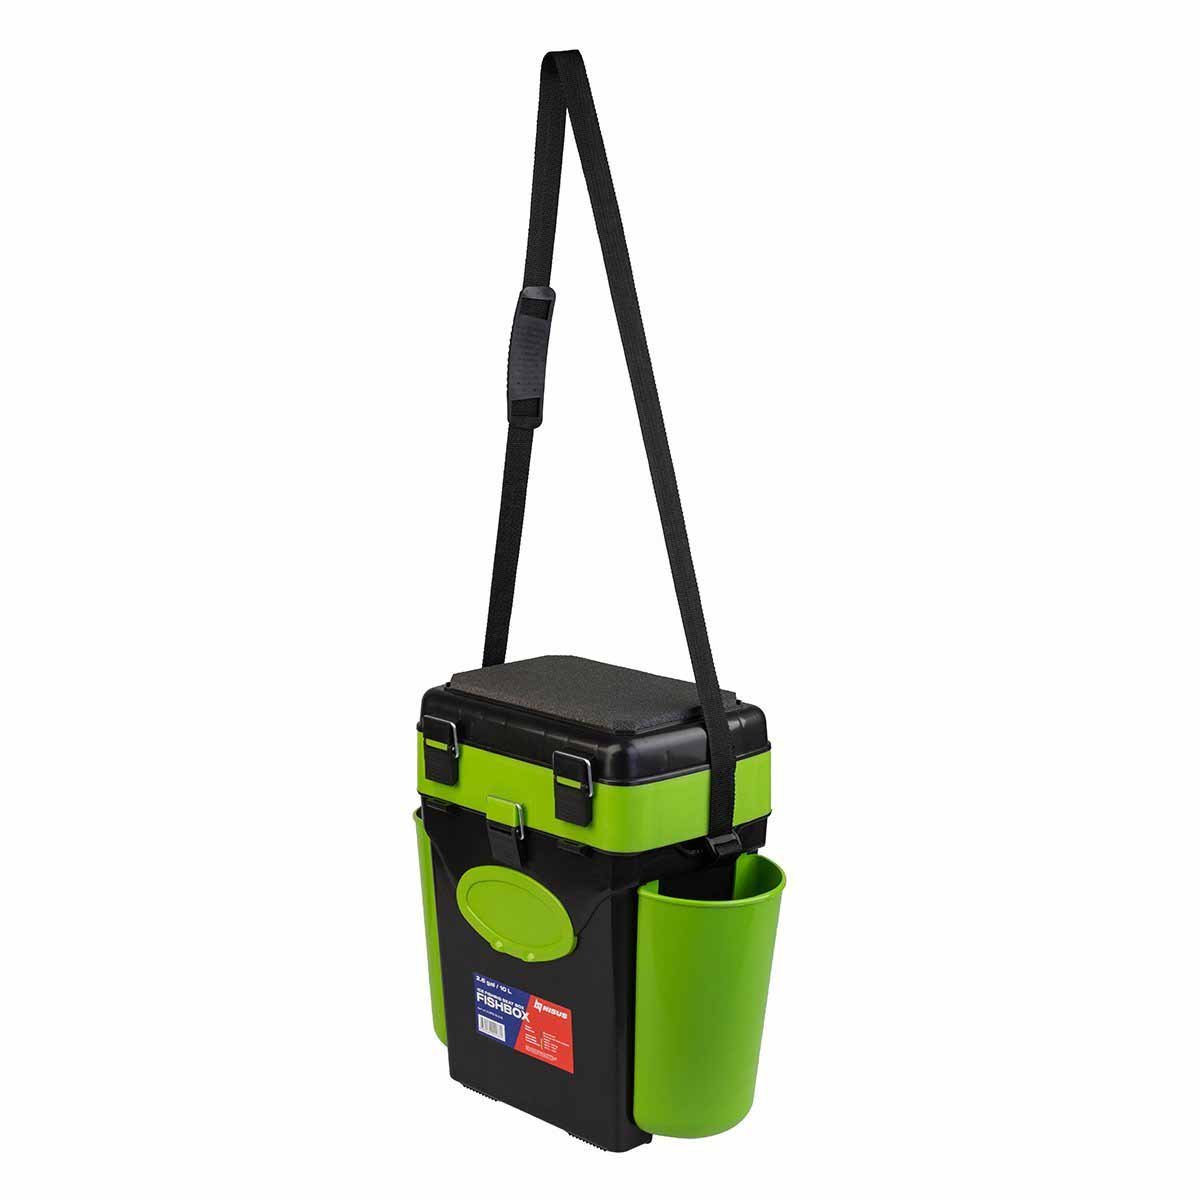 FishBox 10 liter SeatBox for Ice Fishing, 2 Compartments, Green